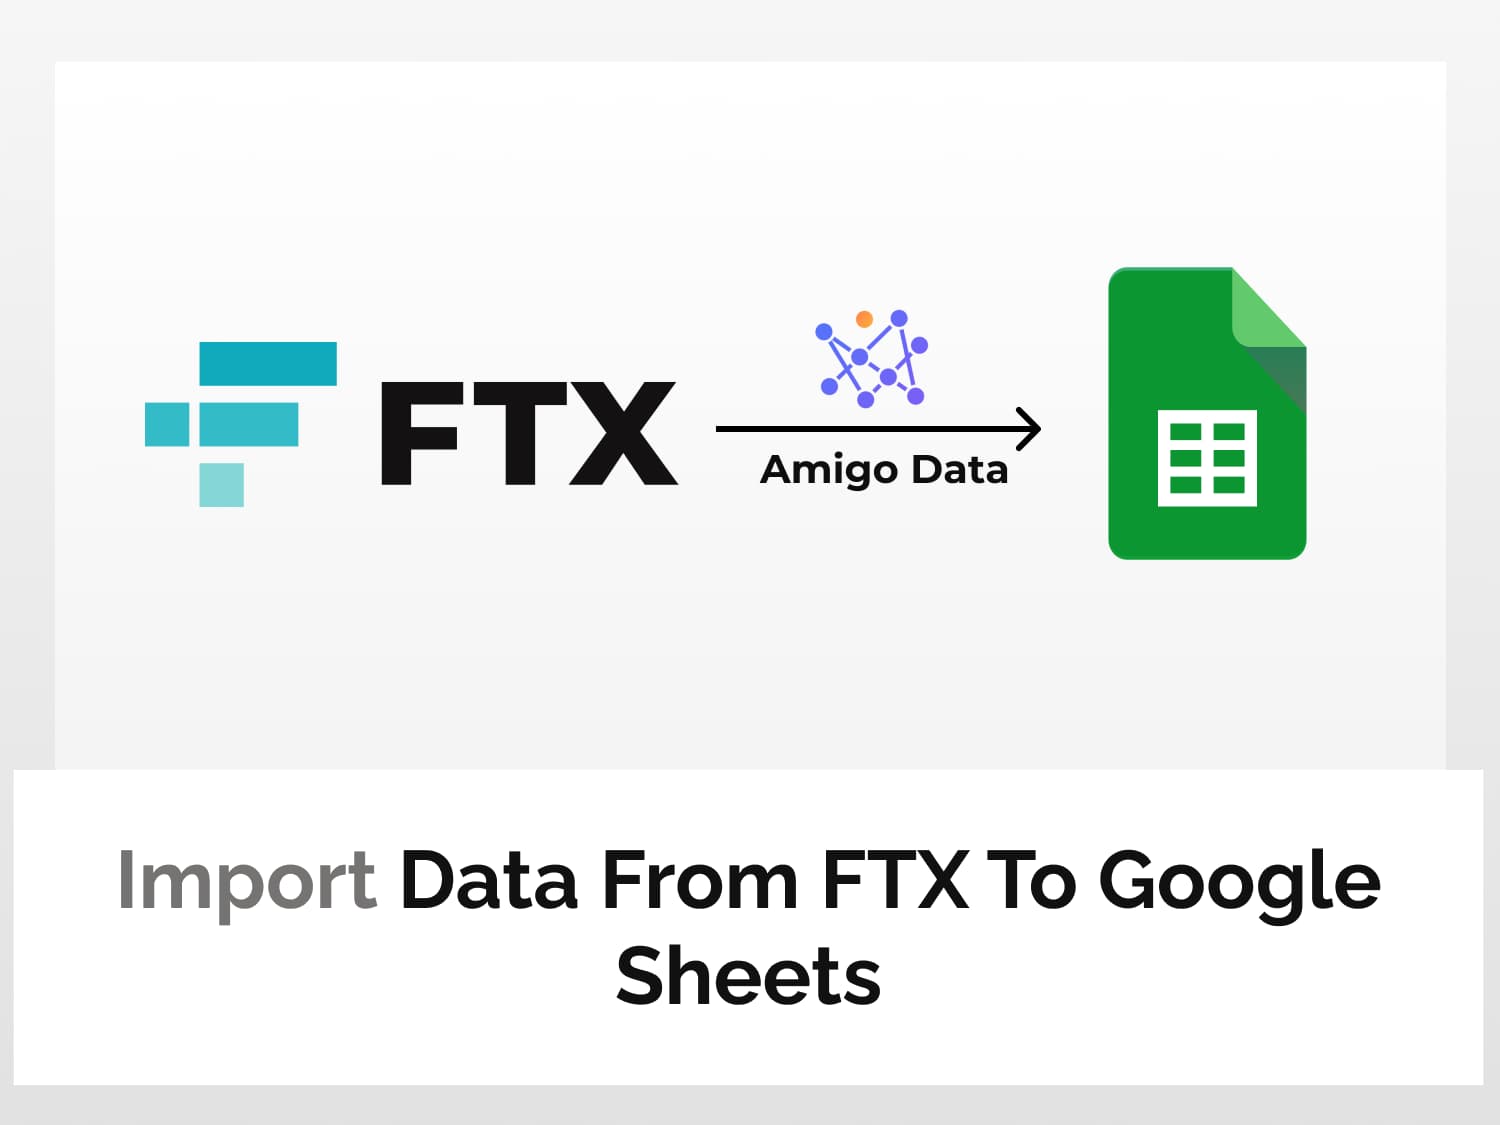 Pull market data from FTX to Google Sheets